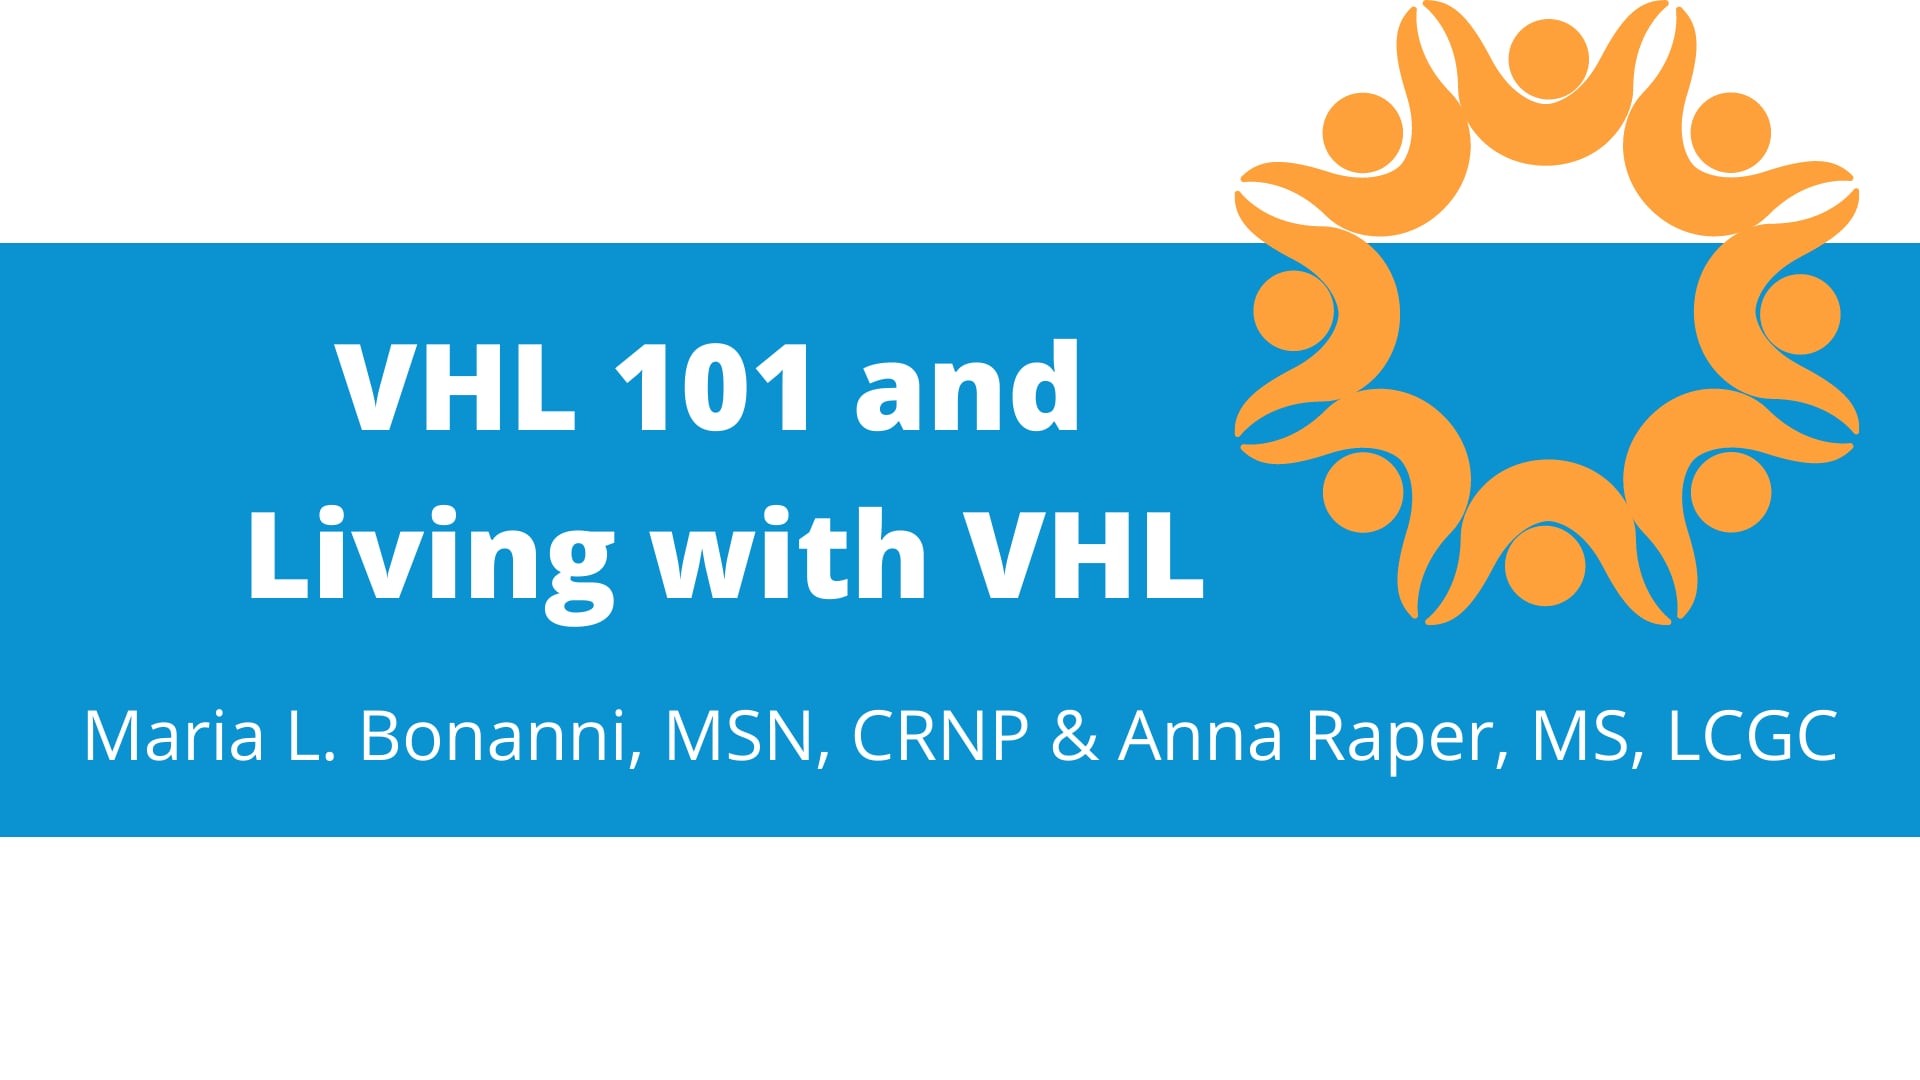 VHL 101 and Living With VHL